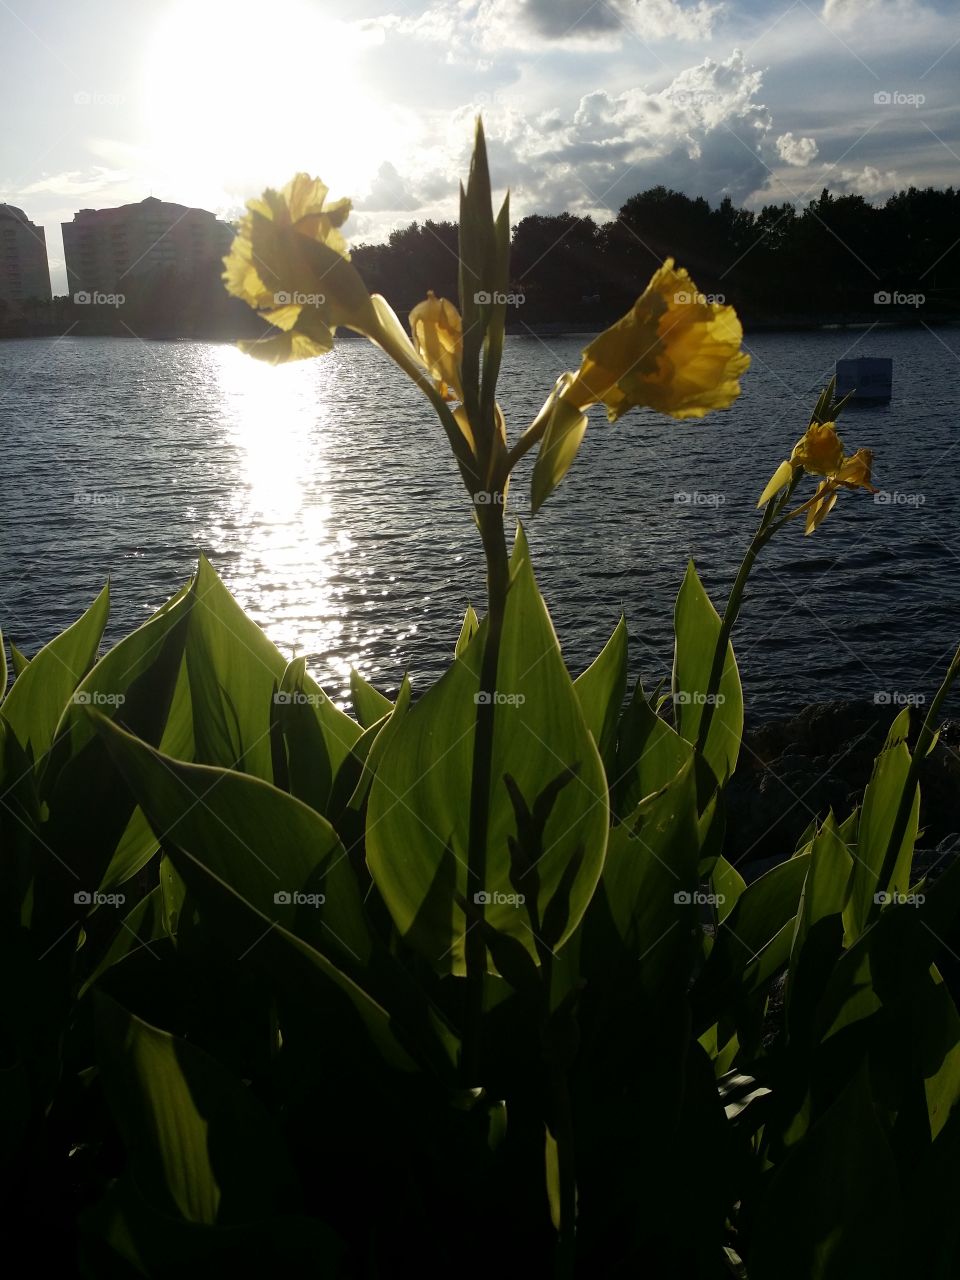 Flower By The Lake. Took this at Cranes Roost in Altamonte Springs Florida